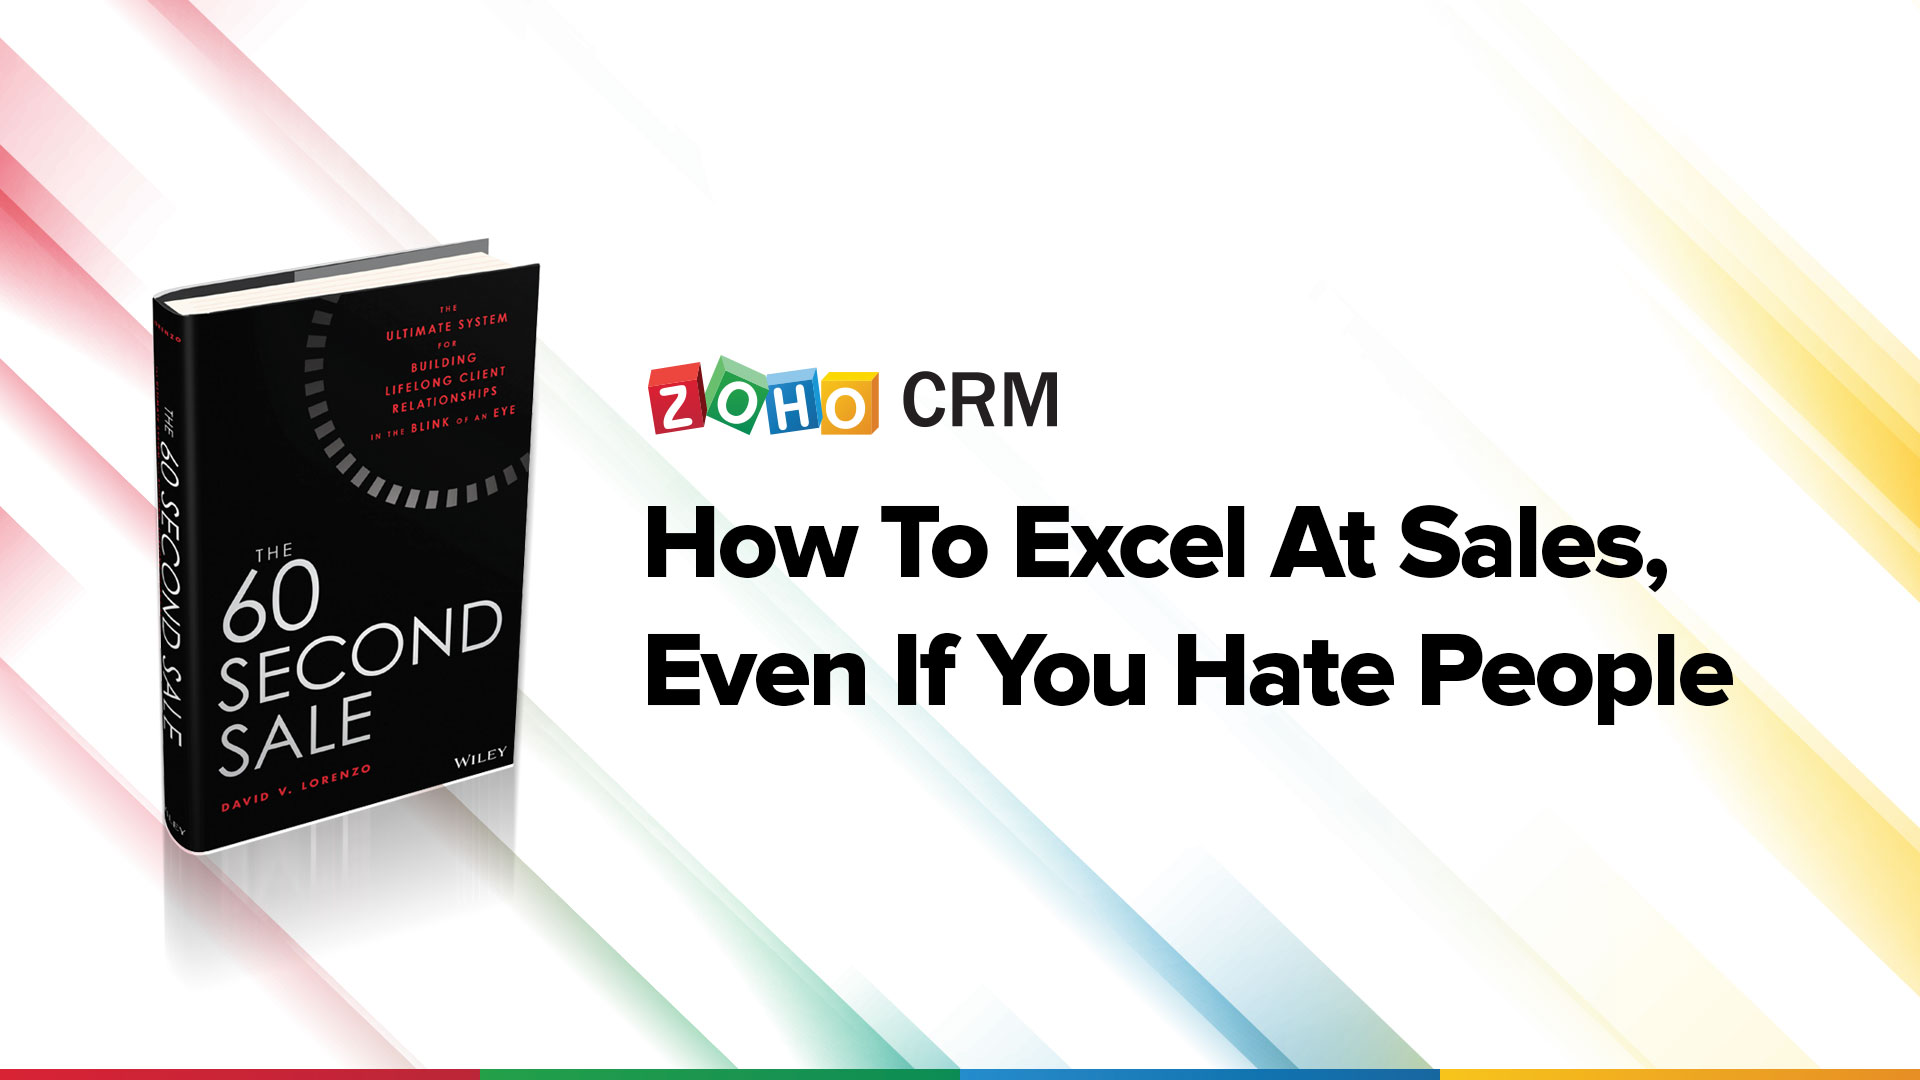 How to excel at sales, even if you hate people